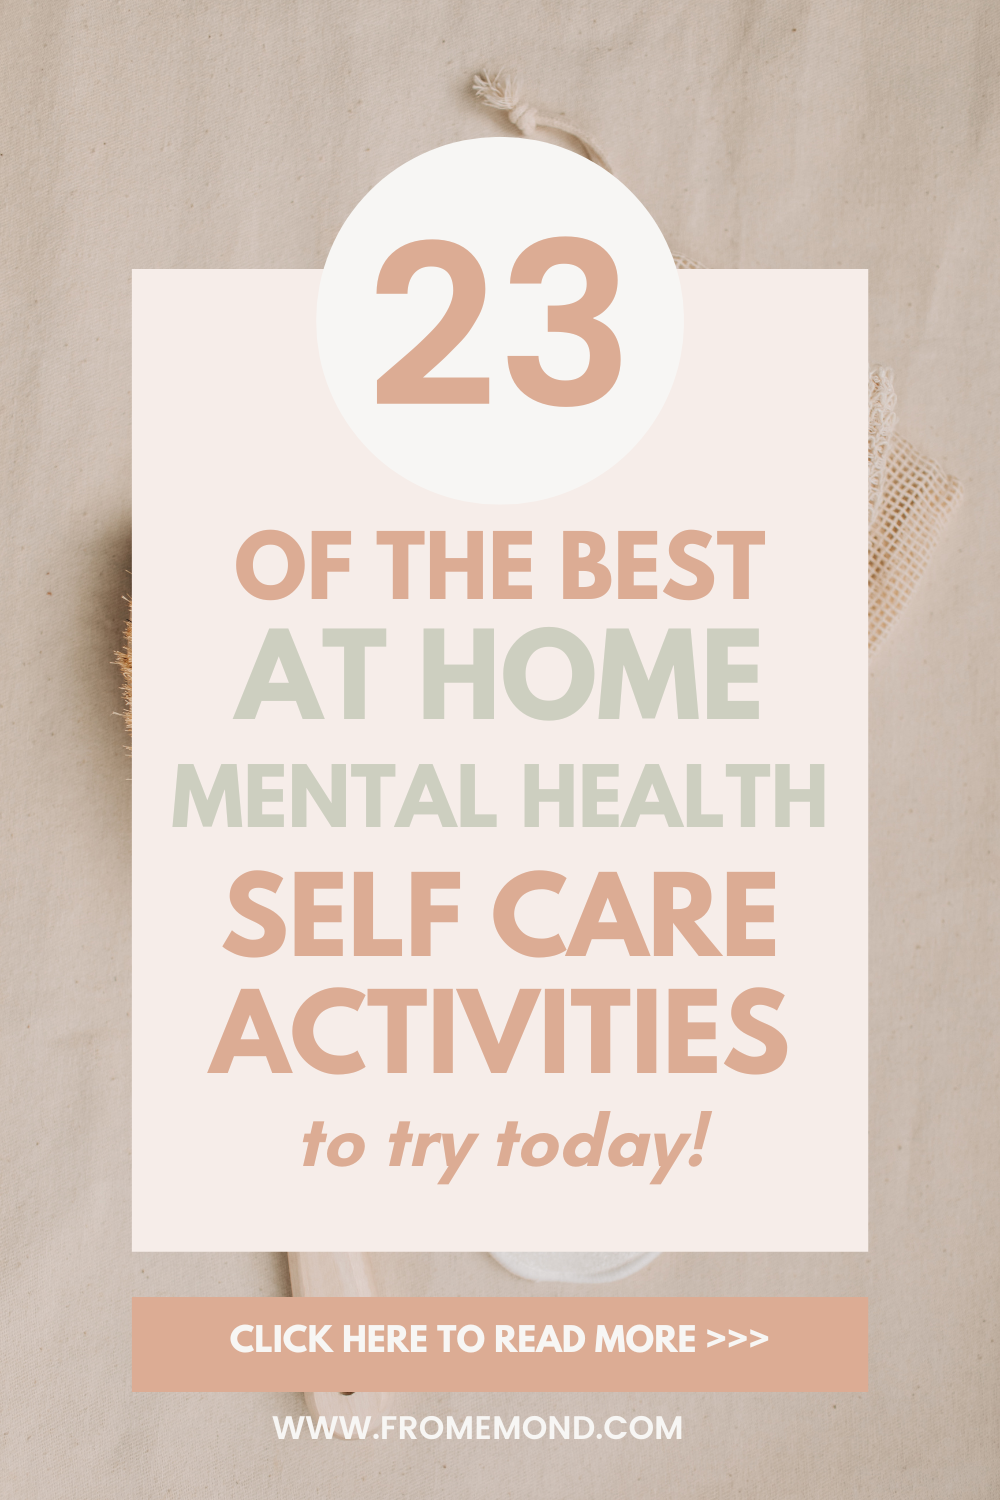 23 of the best at-home self care activities to try today